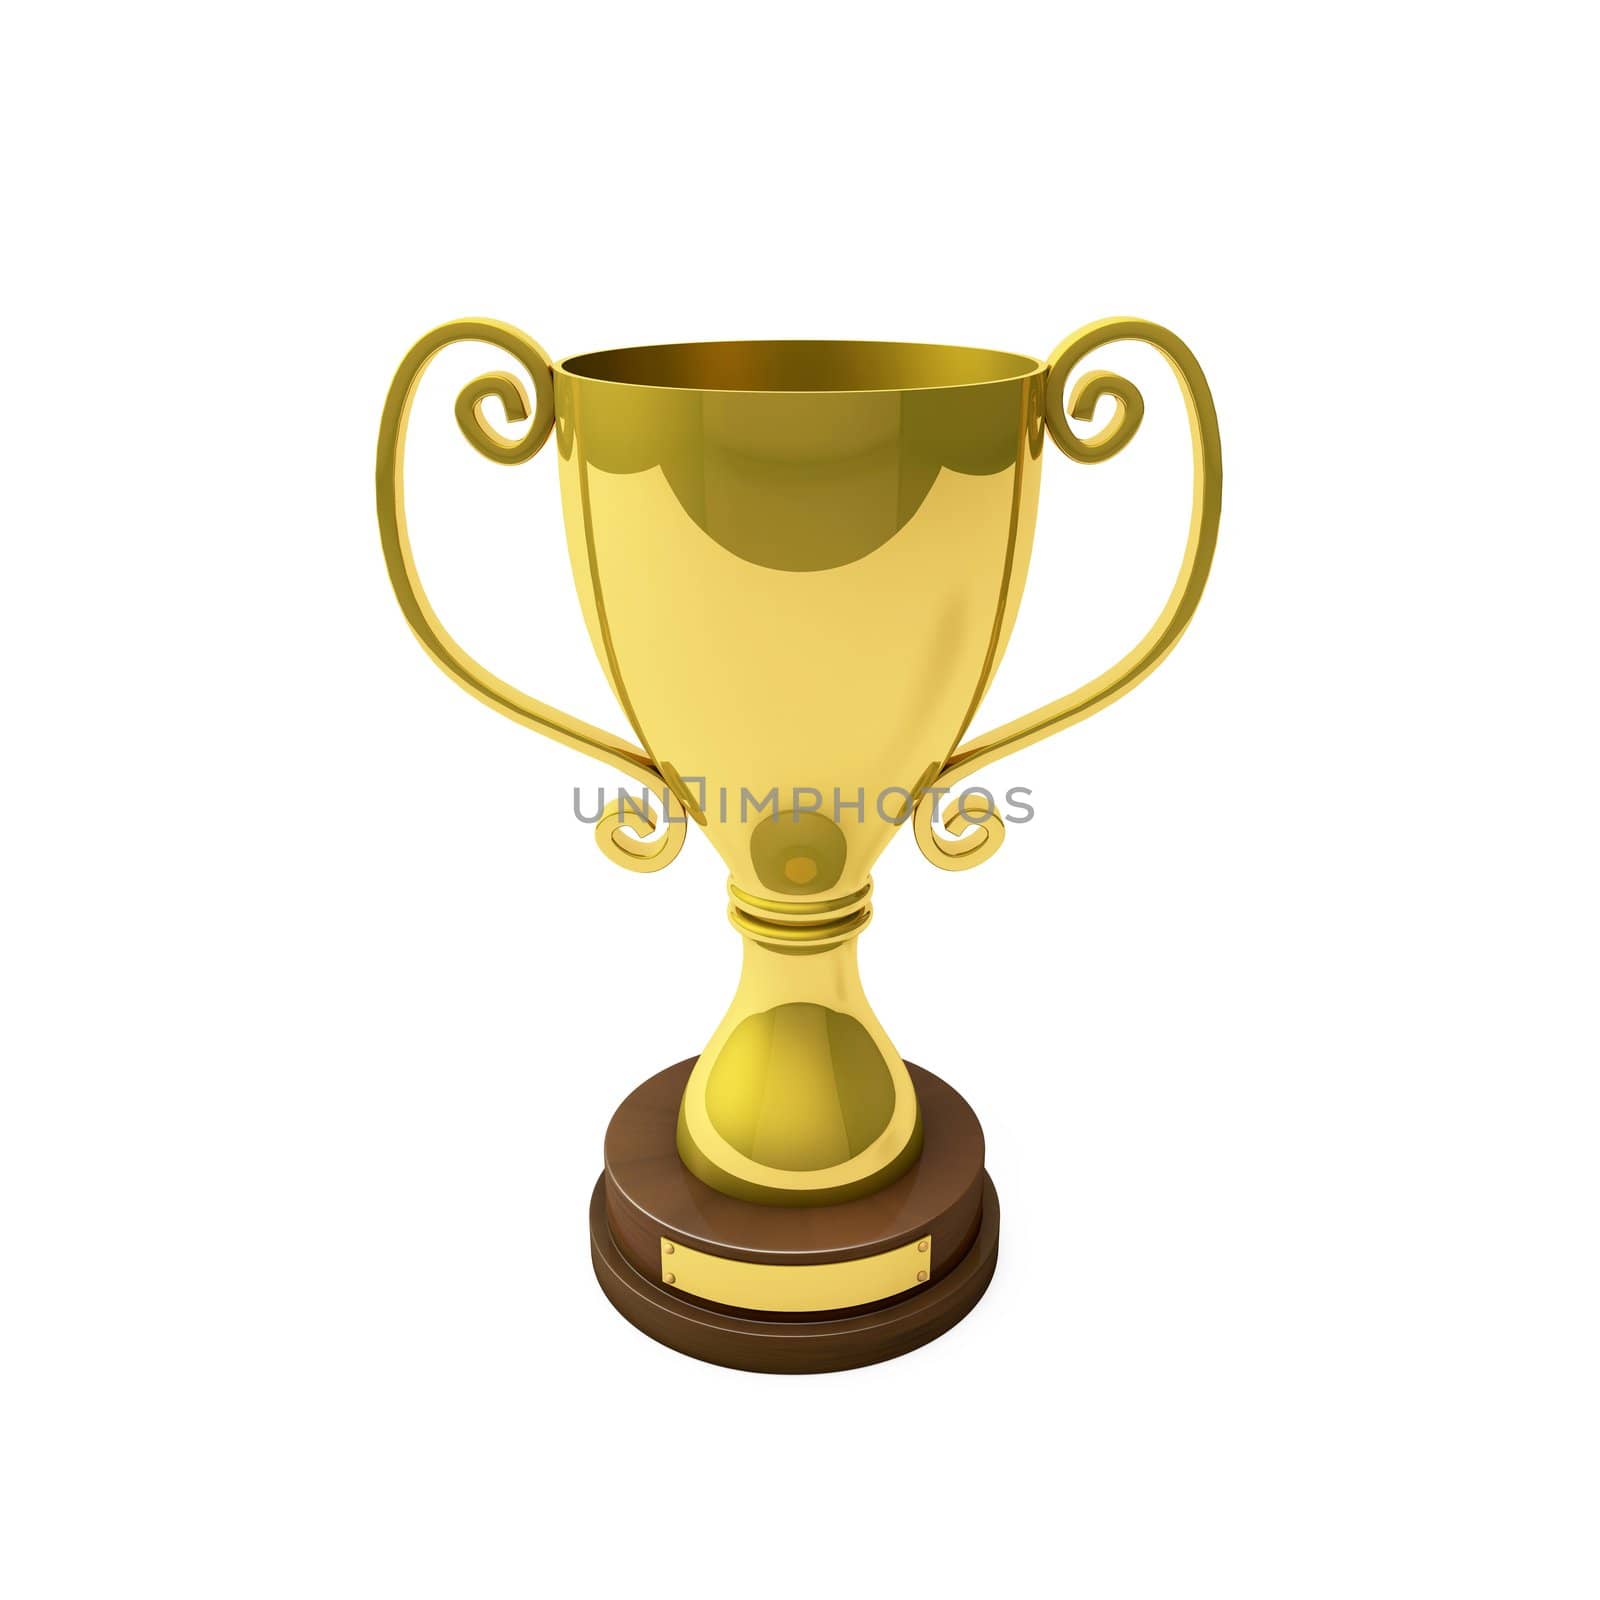 The trophy for one place is huge and showing everyone my success